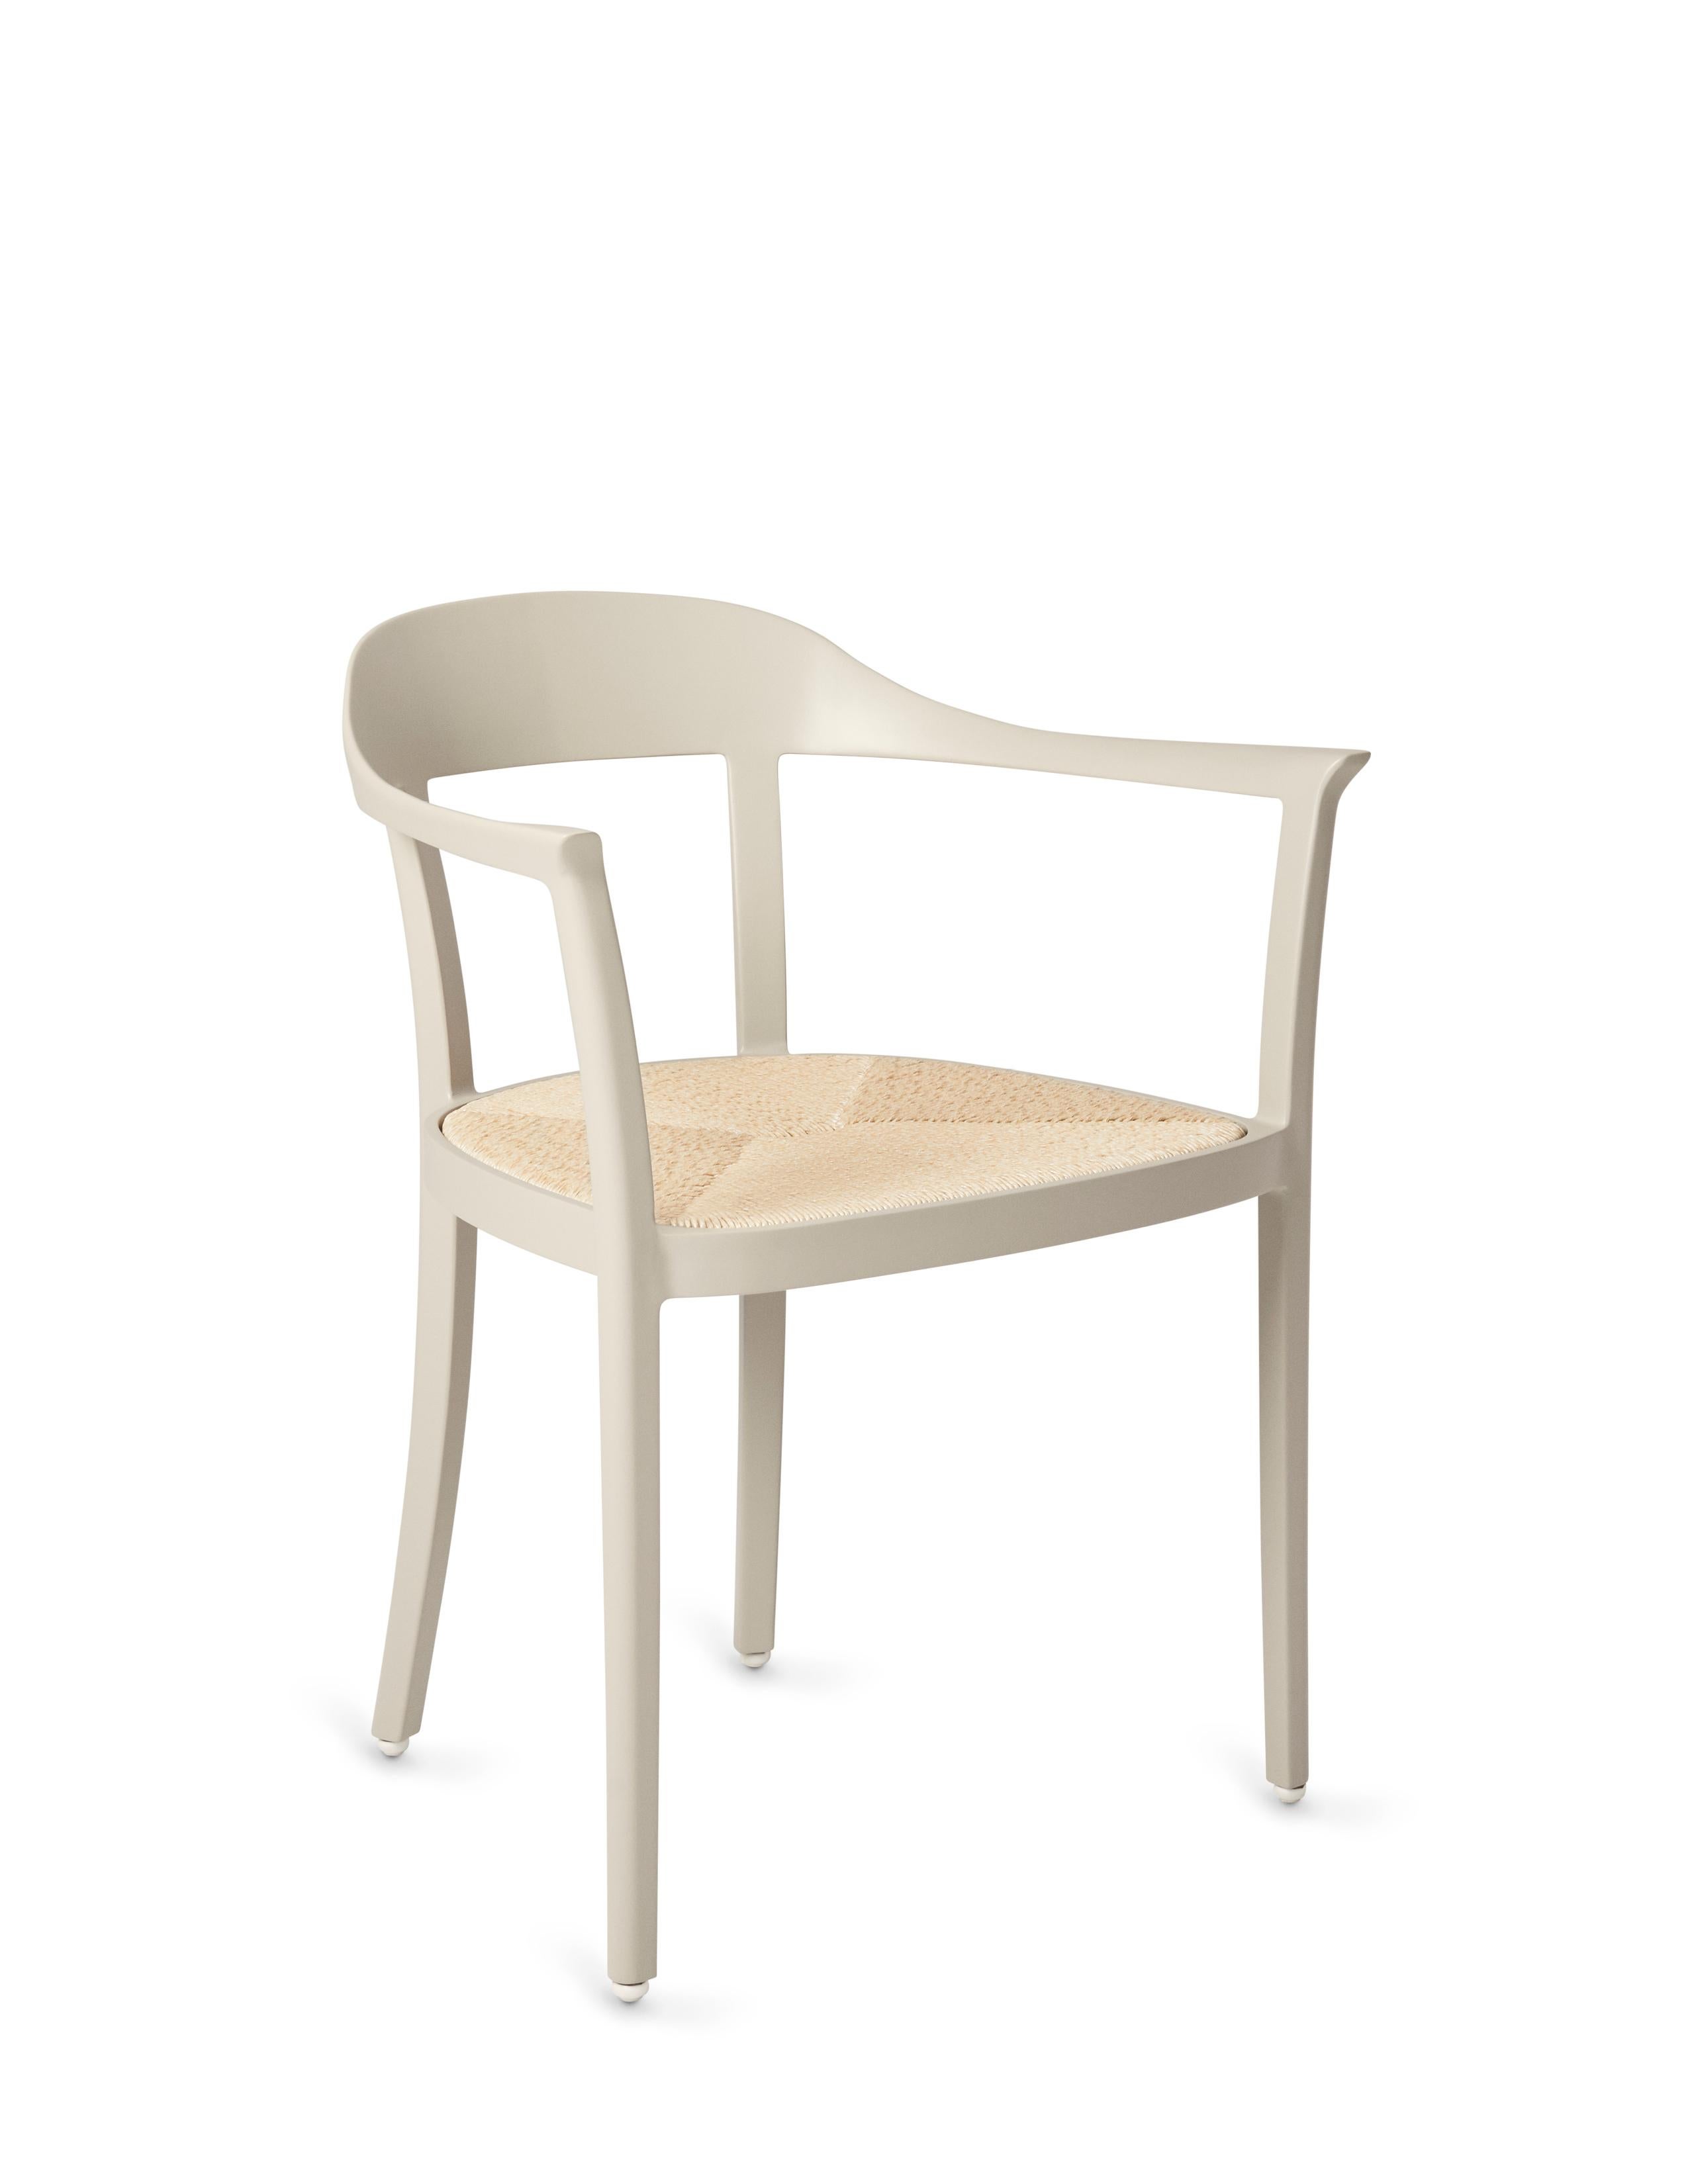 Contemporary Chesapeake Dining Chair, Classic White, Woven Rush, Outdoor Garden Furniture